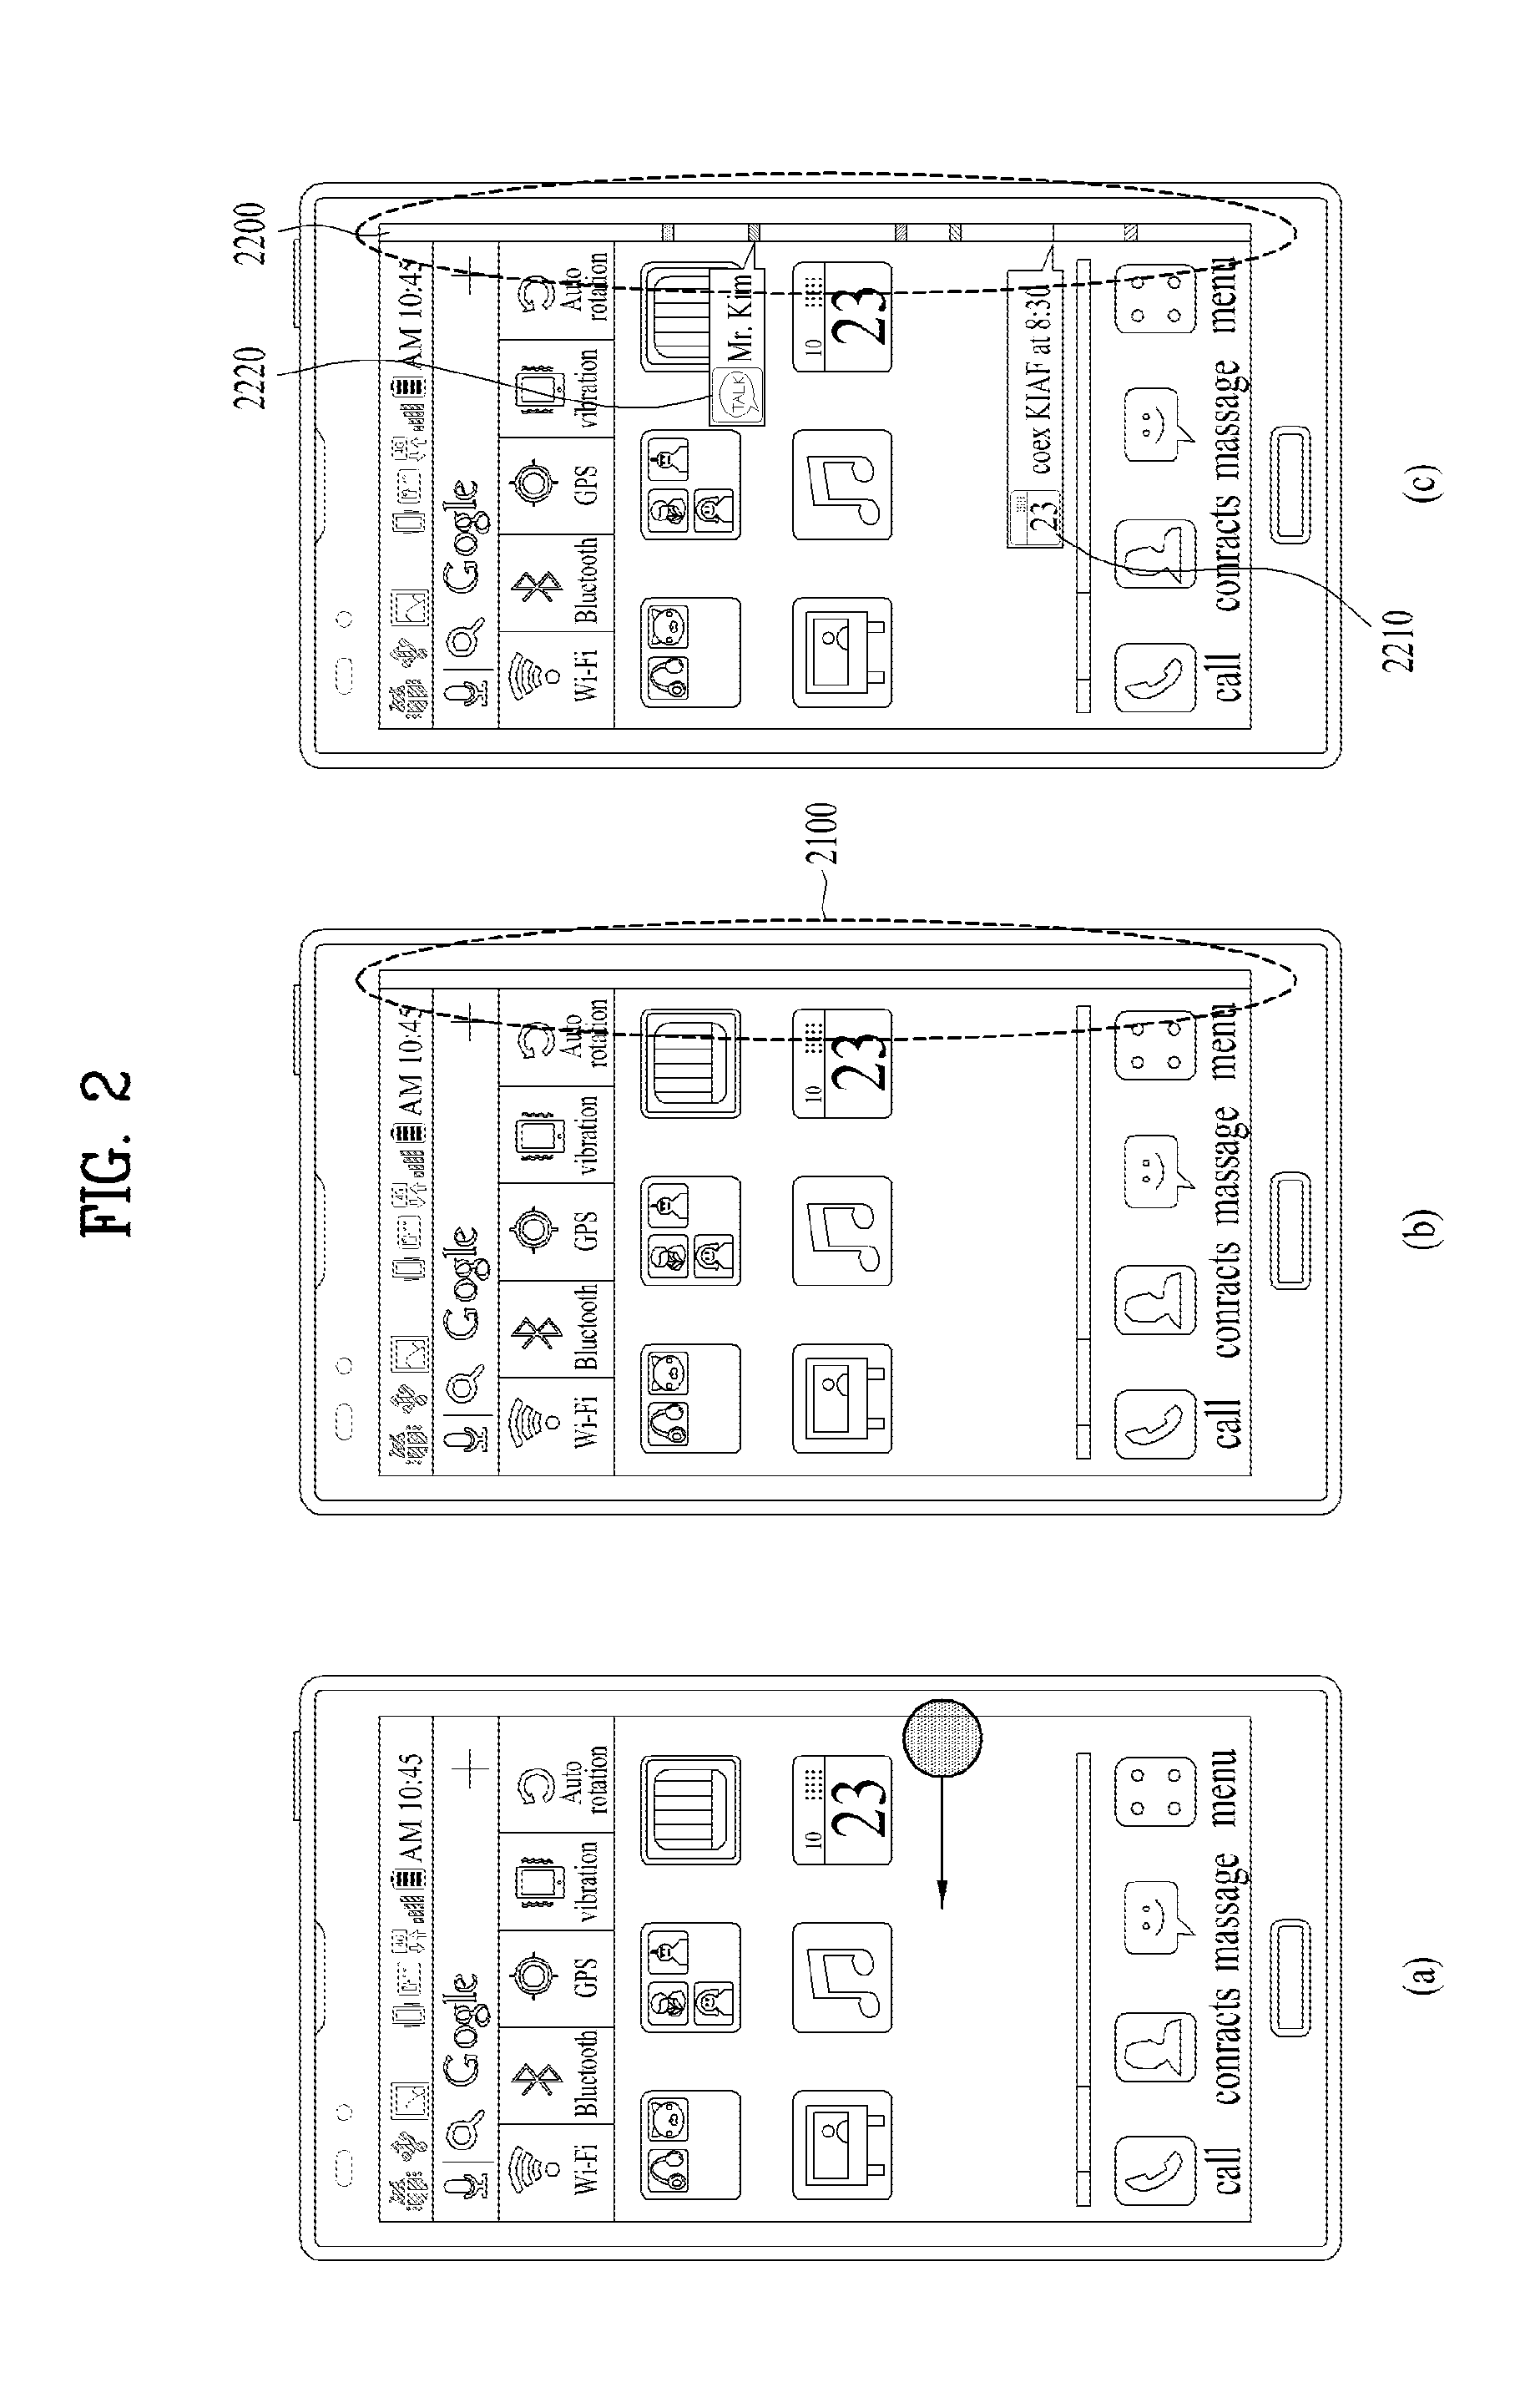 Apparatus for processing a schedule interface and method thereof